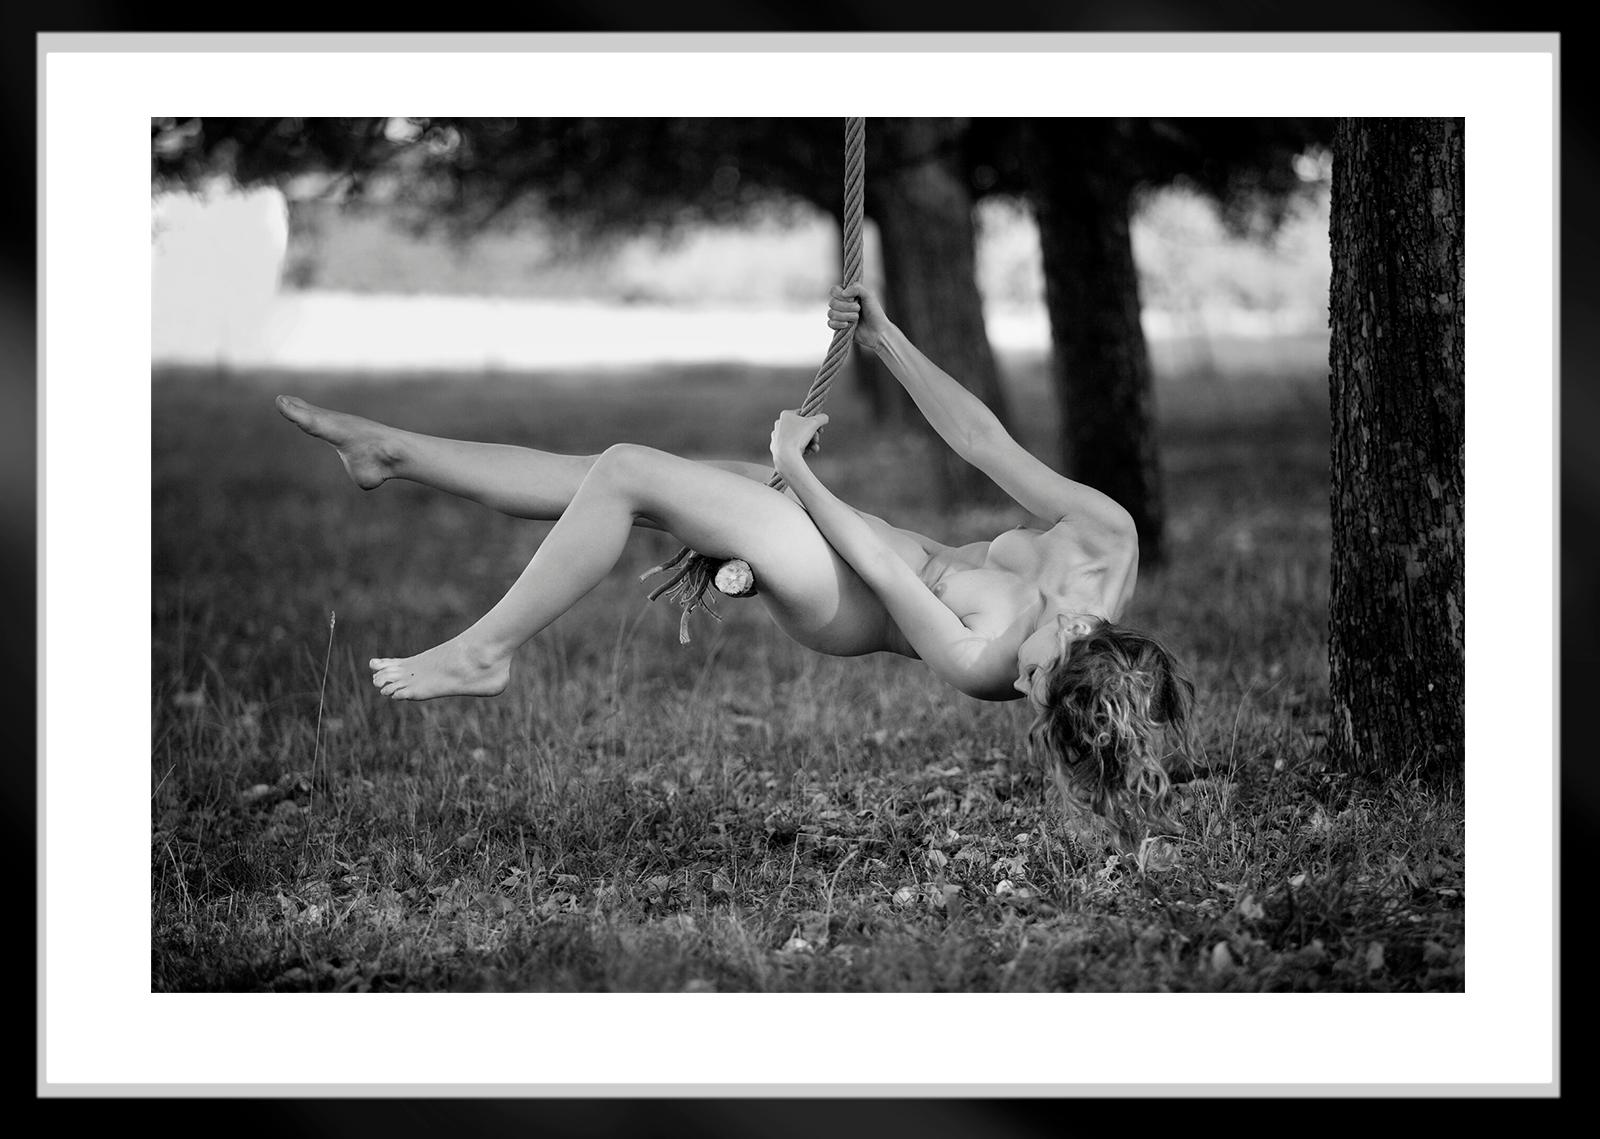  Swing  - Signed limited edition archival pigment print, Edition of 5

This is an Archival Pigment print on fiber based paper ( Hahnemühle Photo Rag® Baryta 315 gsm , Acid-free and lignin-free paper, Museum quality paper for highest age resistance